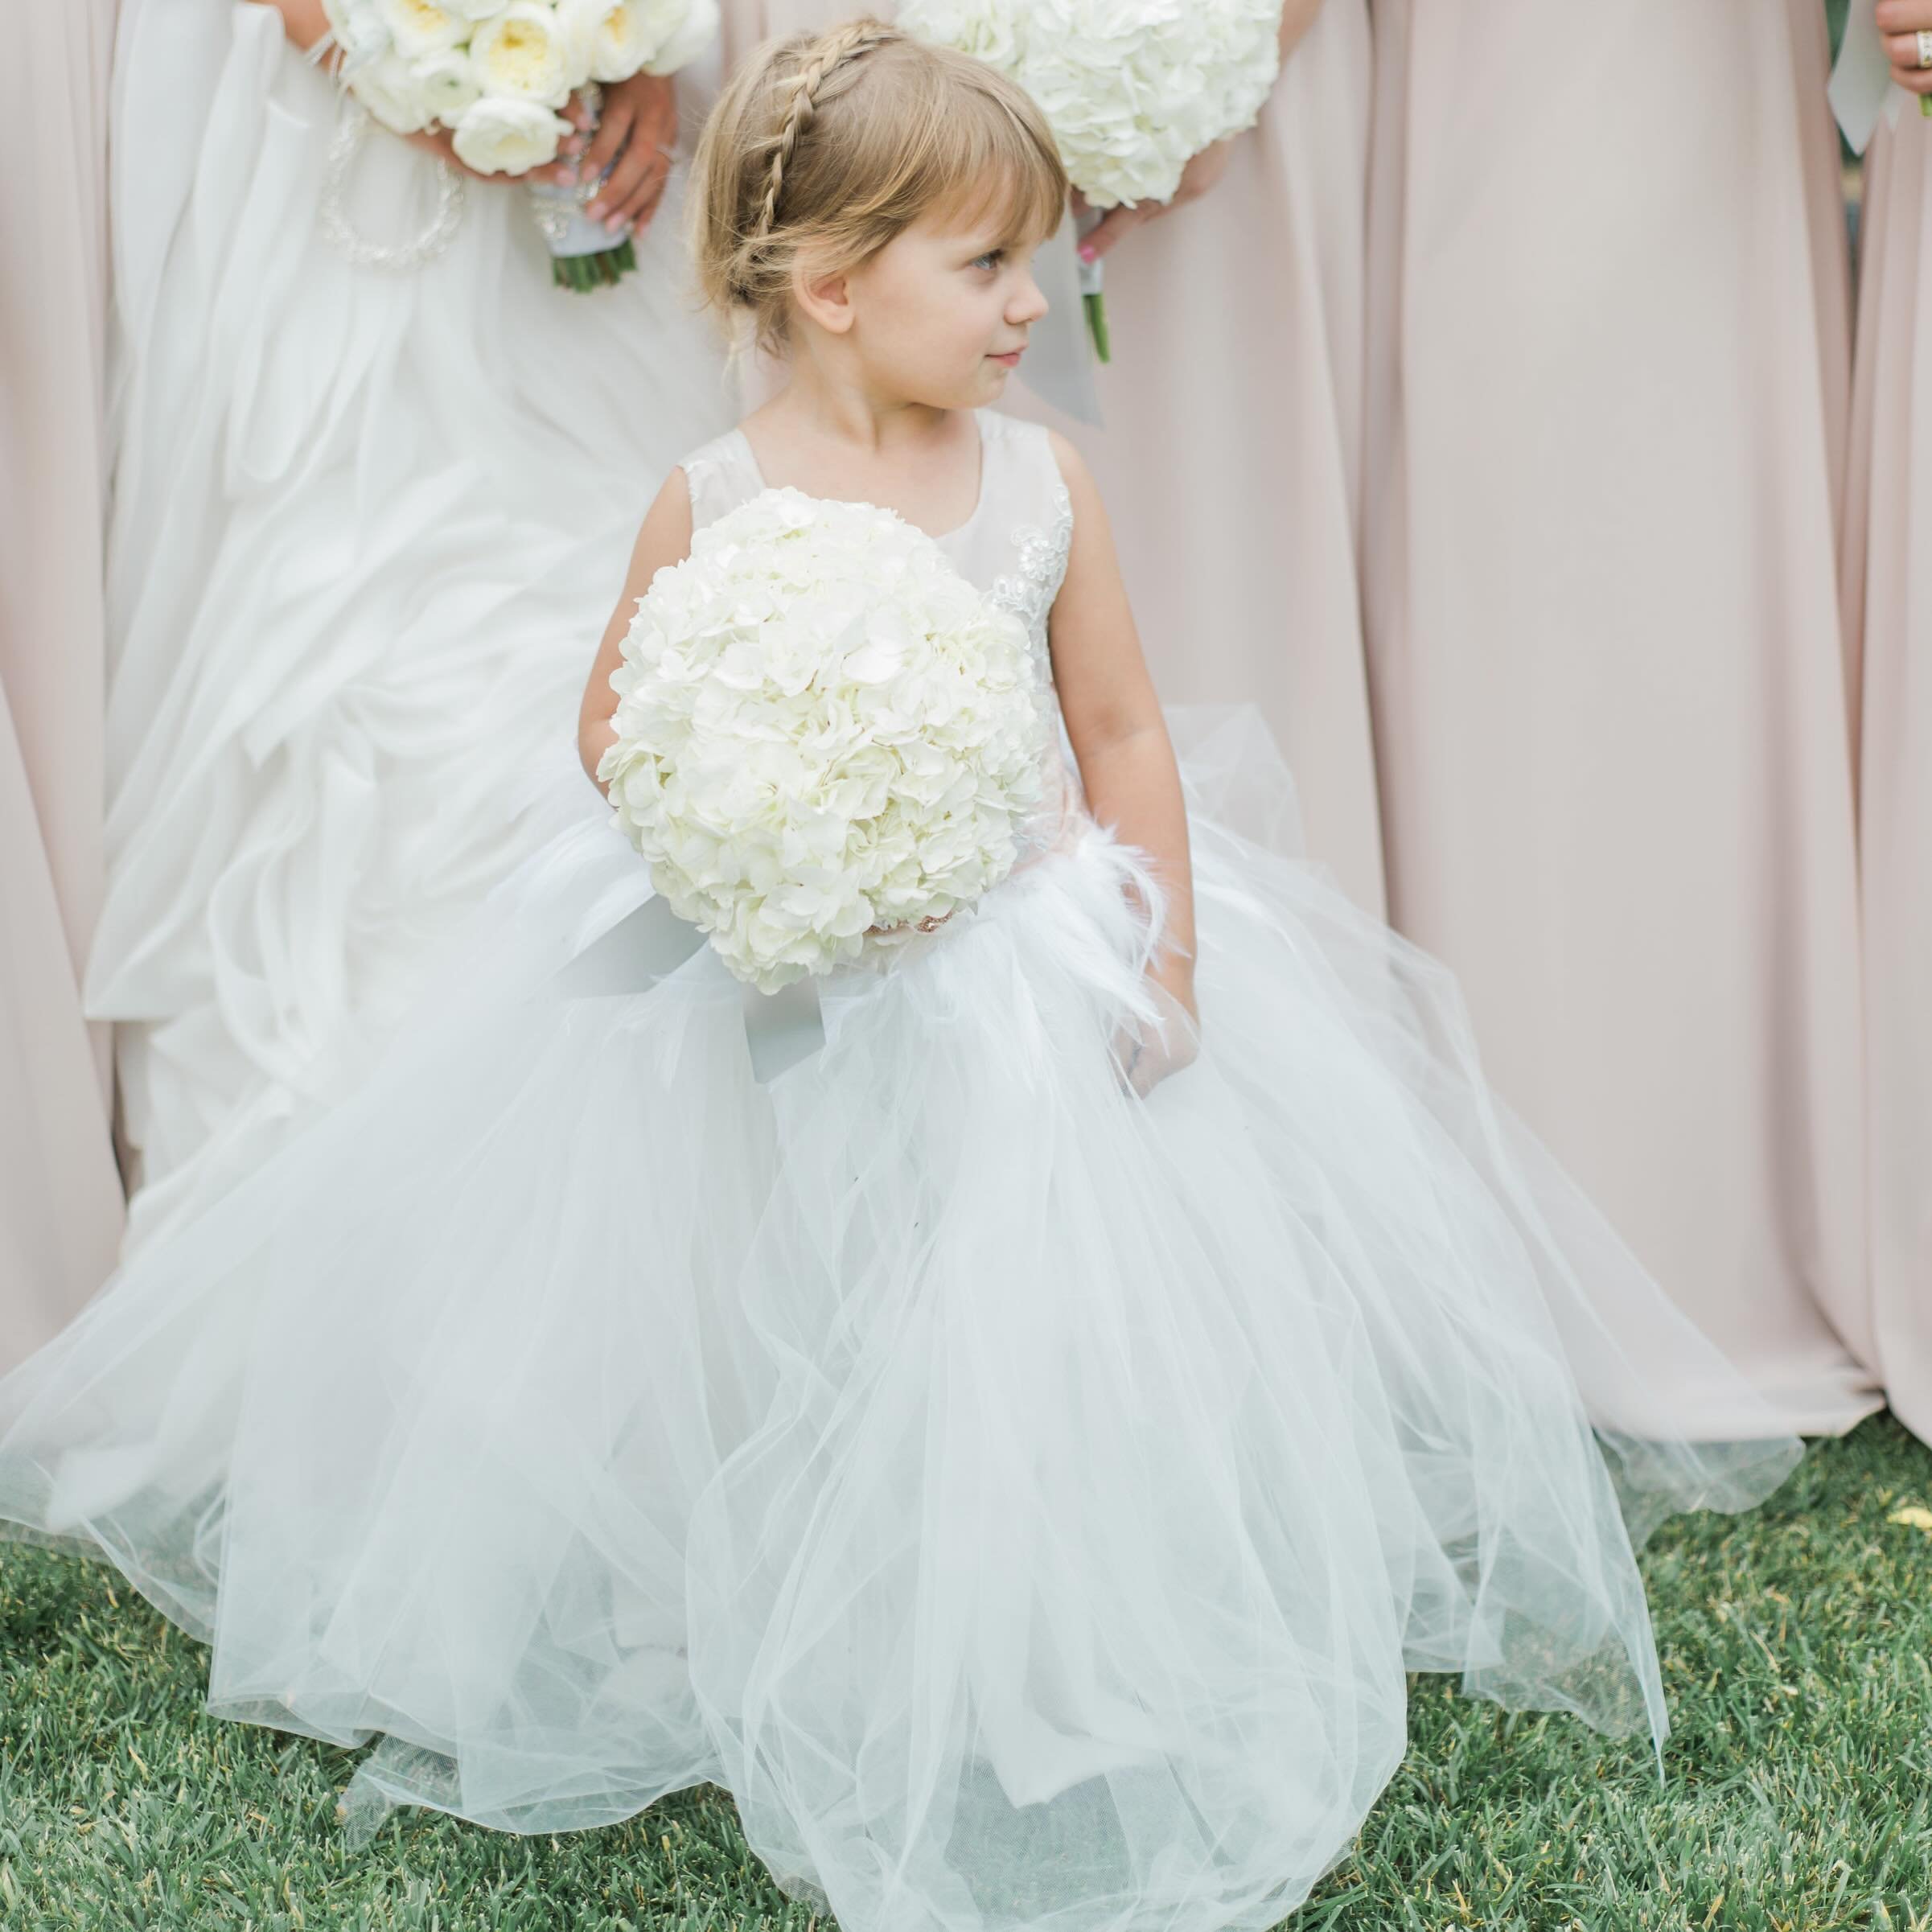 Meet our adorable flower girl, spreading petals of joy with every step! 🌸💕 Isn&rsquo;t she just the cutest addition to our special day? 

Planner: @sayidotdetails
Photography: @ anyakernes
Venue: @bernarduslodge
Florist: @valleyfloristdesign

#Flow